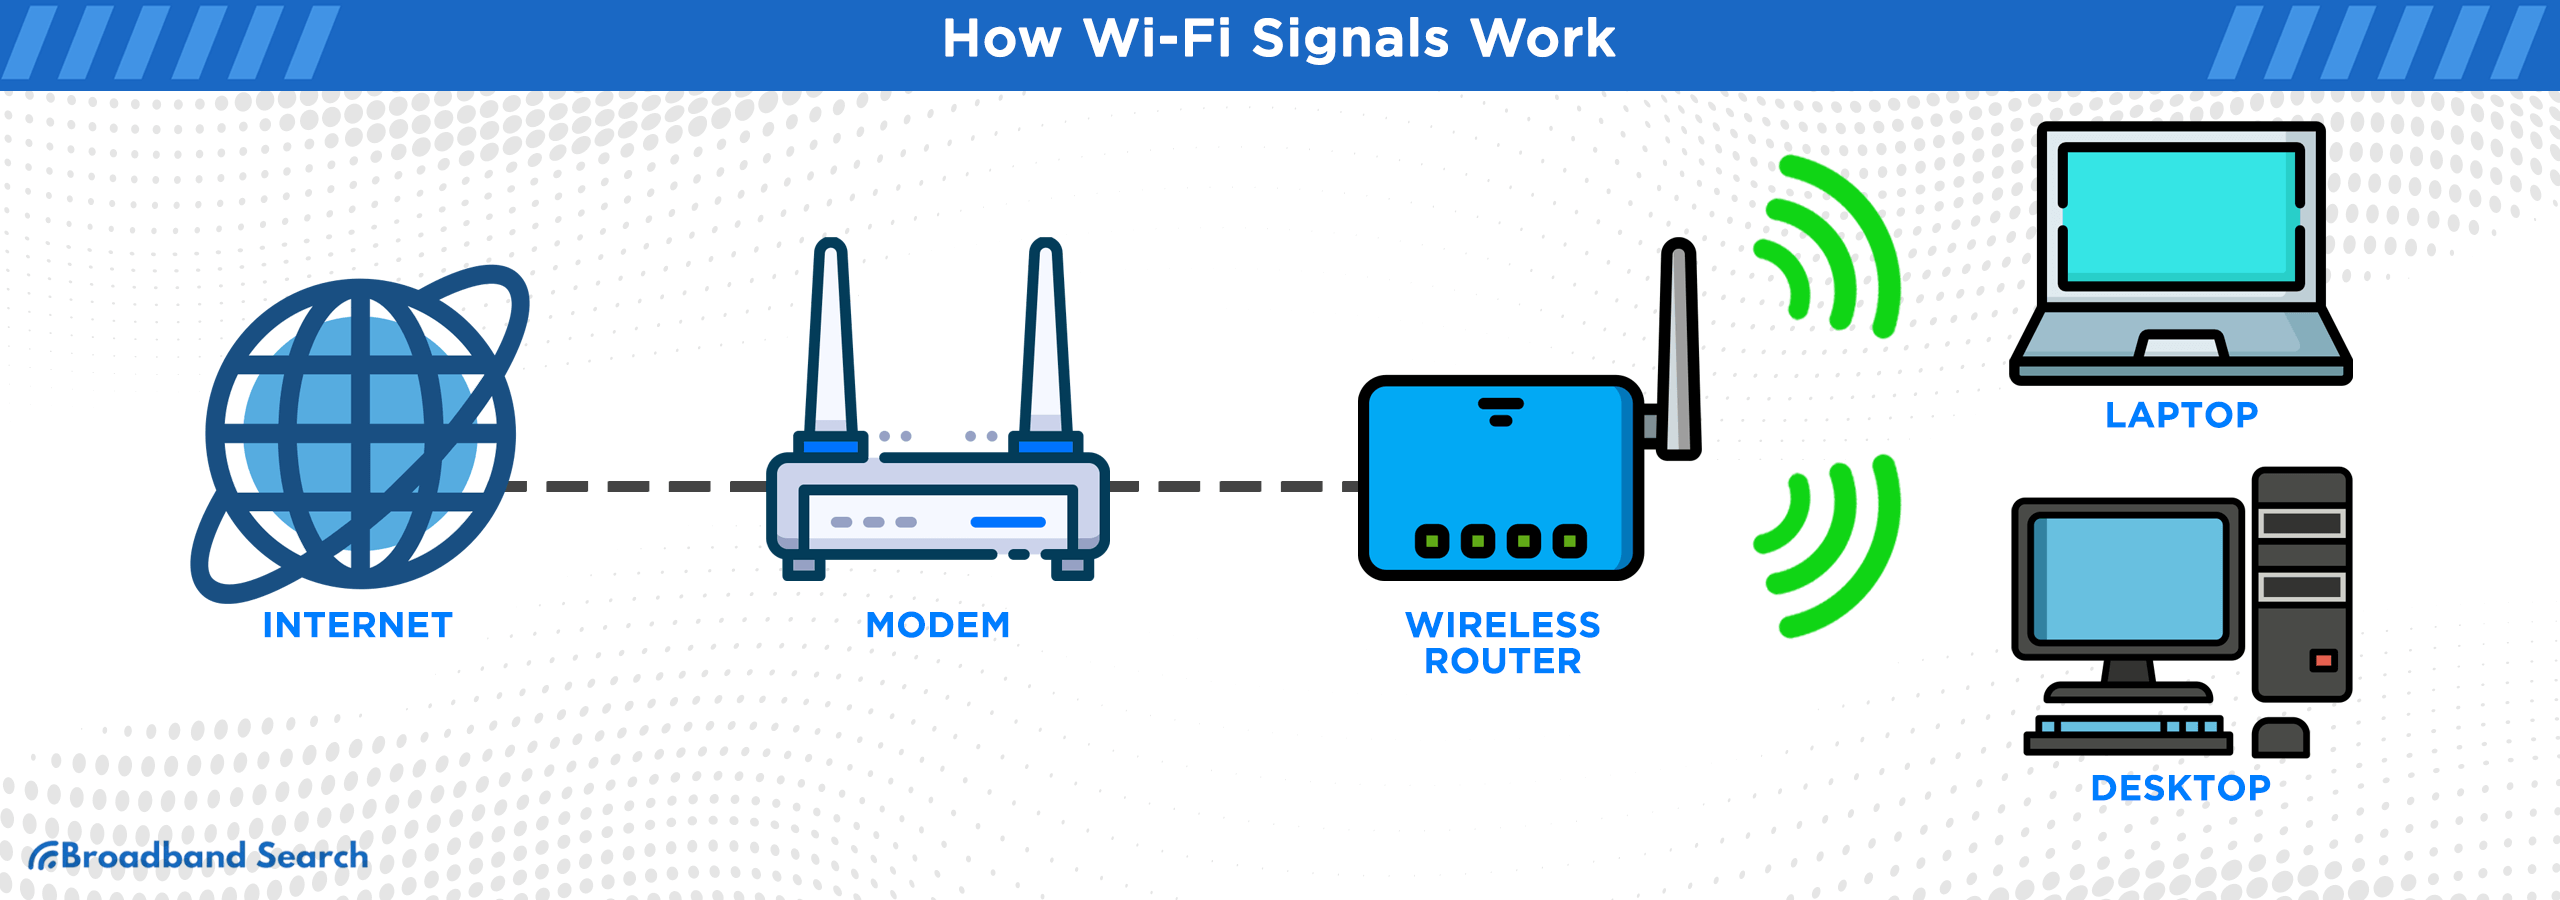 How wi-fi signals work